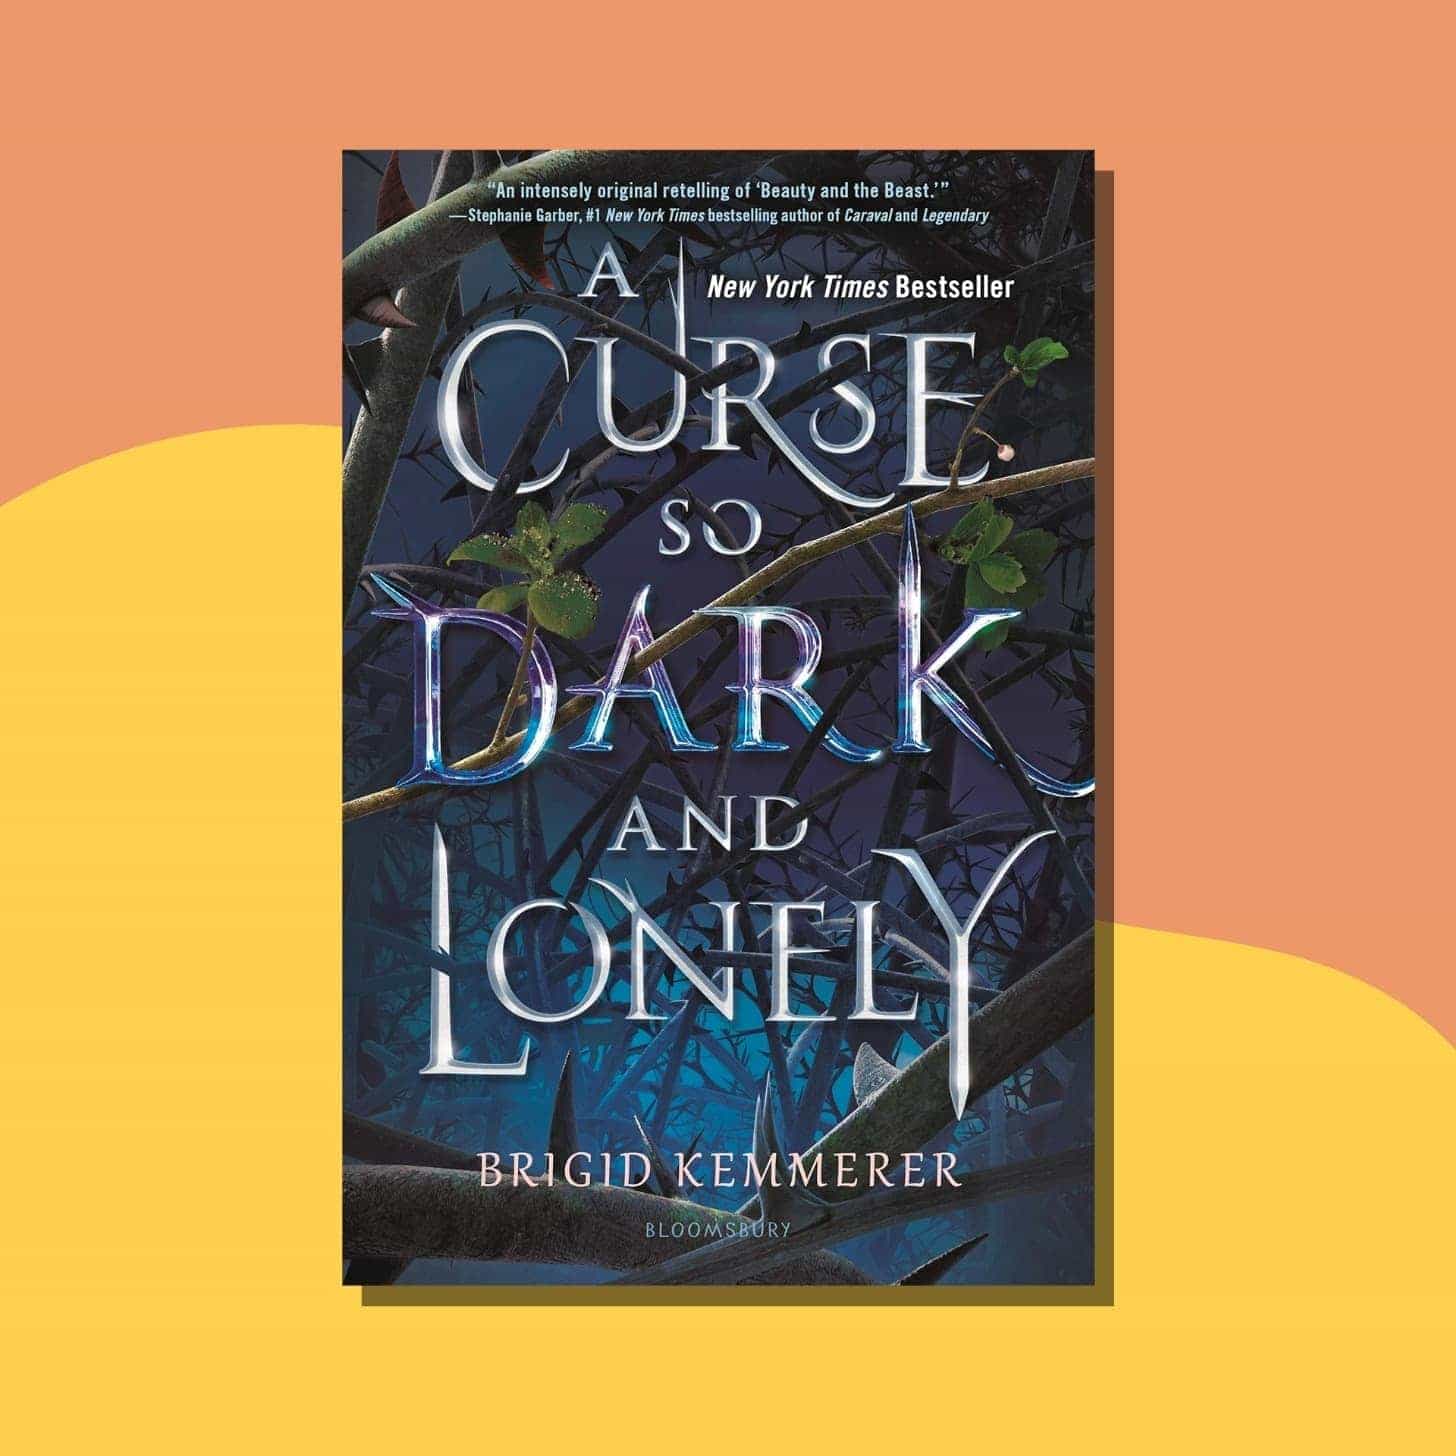 “A Curse So Dark and Lonely” by Brigid Kemmerer